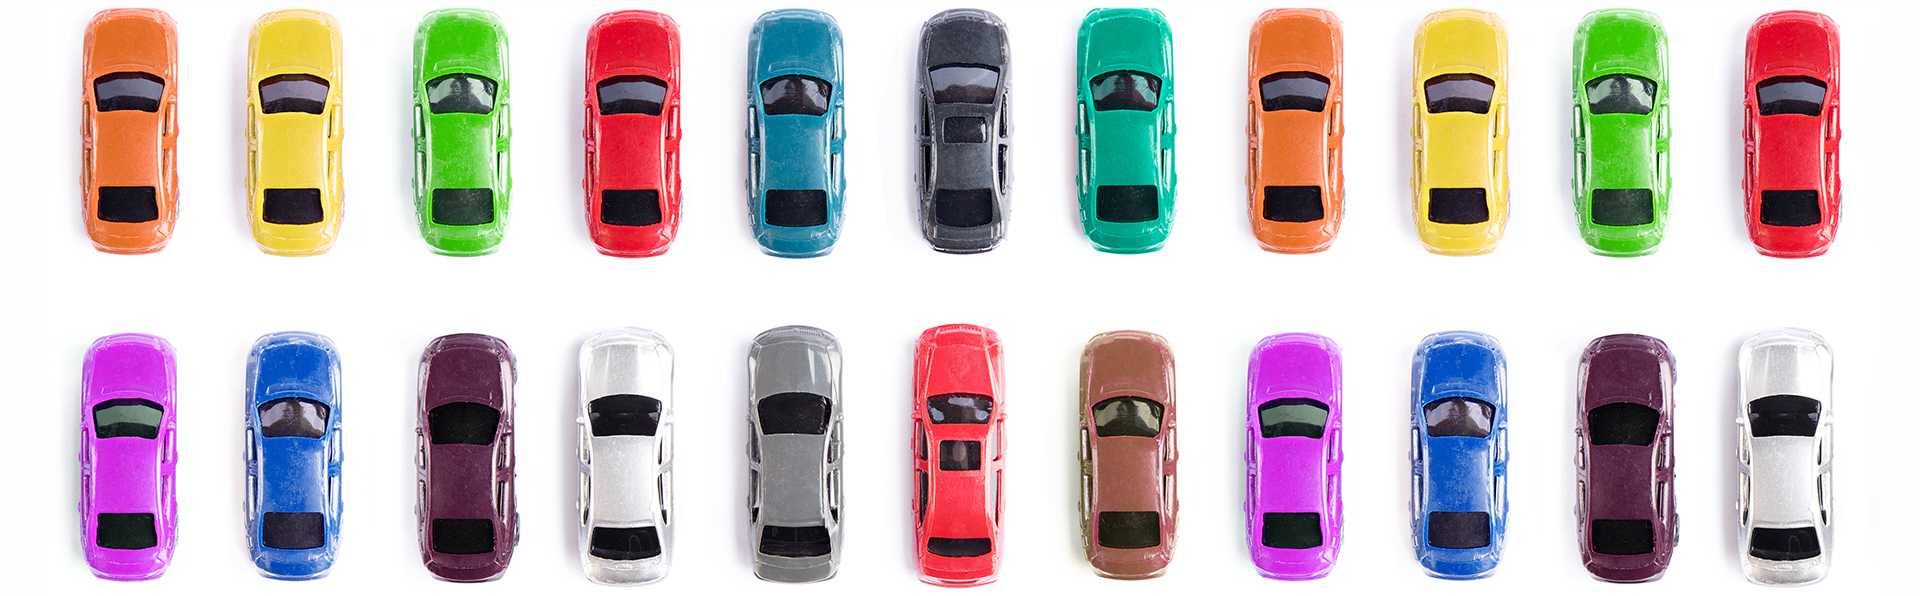 What Does Your Car Colour Say About You?